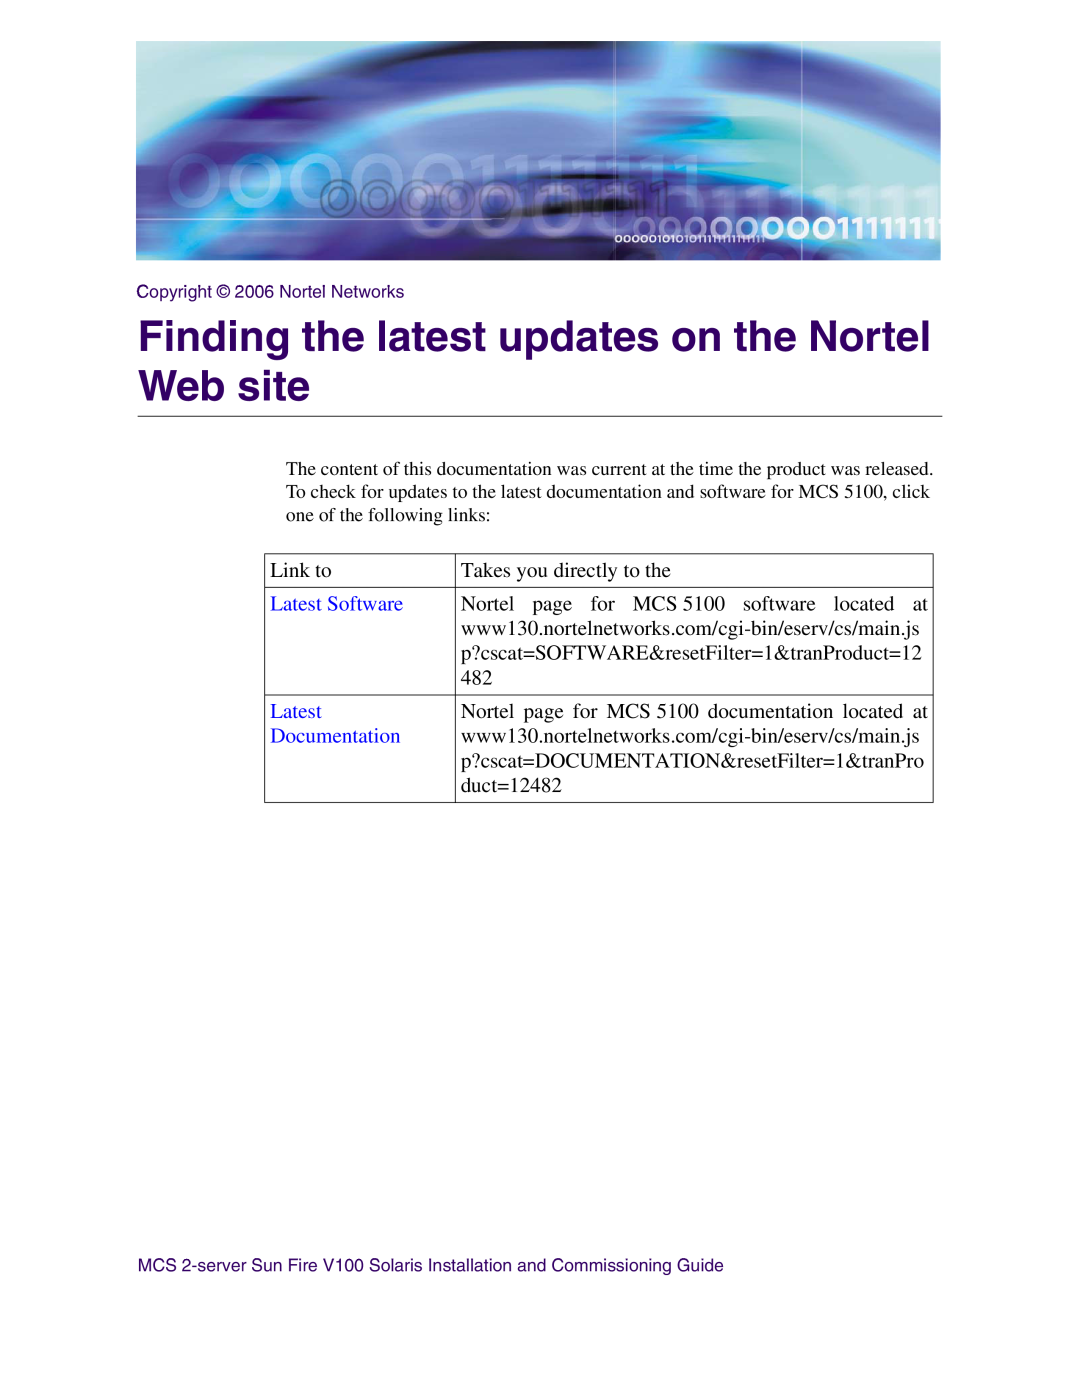 Nortel Networks V100 manual Finding the latest updates on the Nortel Web site, Latest Software, Documentation 